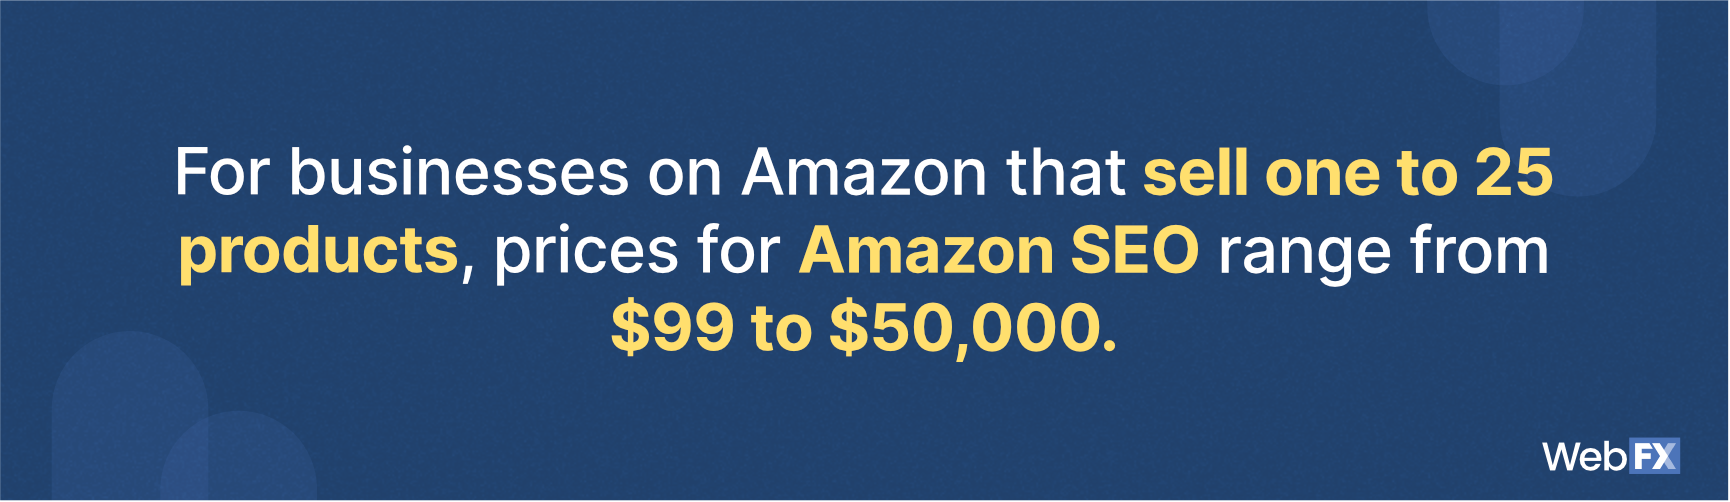 Amazon SEO pricing for businesses that sell one to 25 products